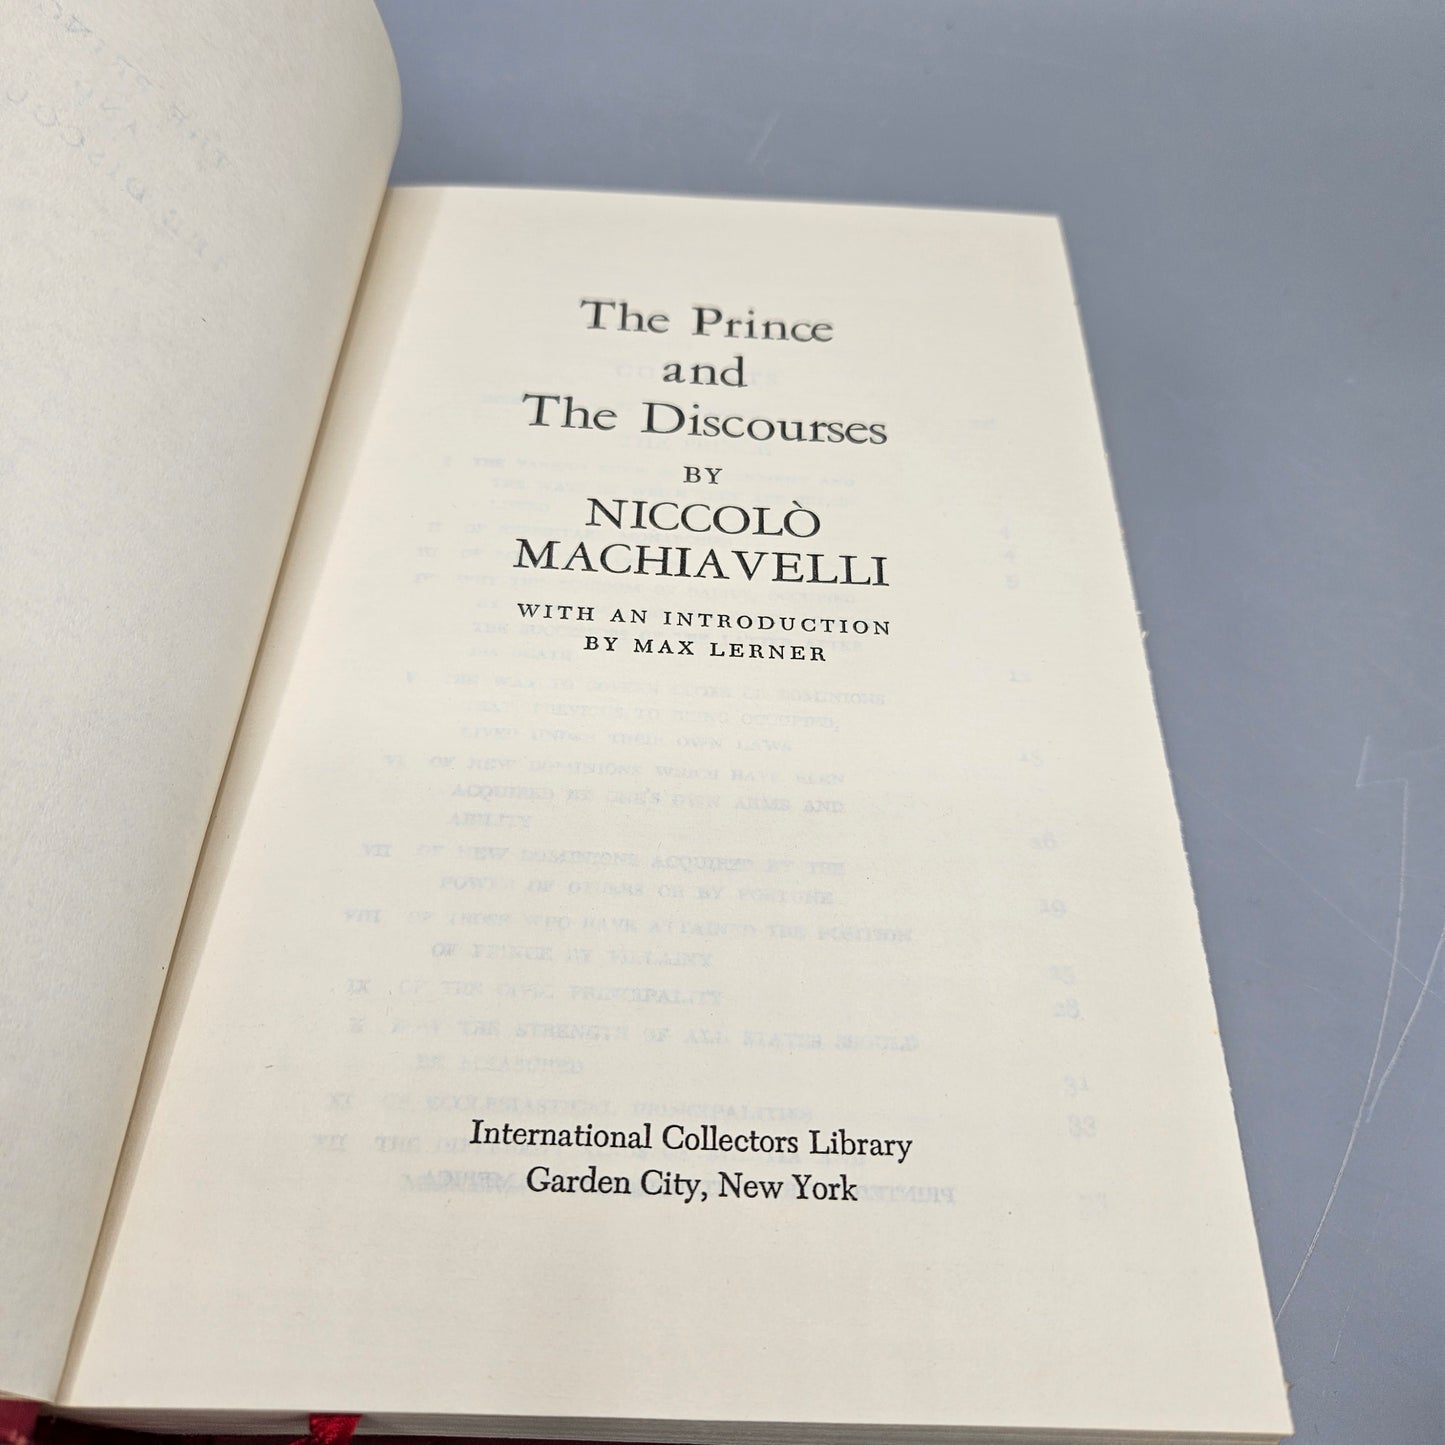 Machiavelli "The Prince and The Discourses" International Collectors Library